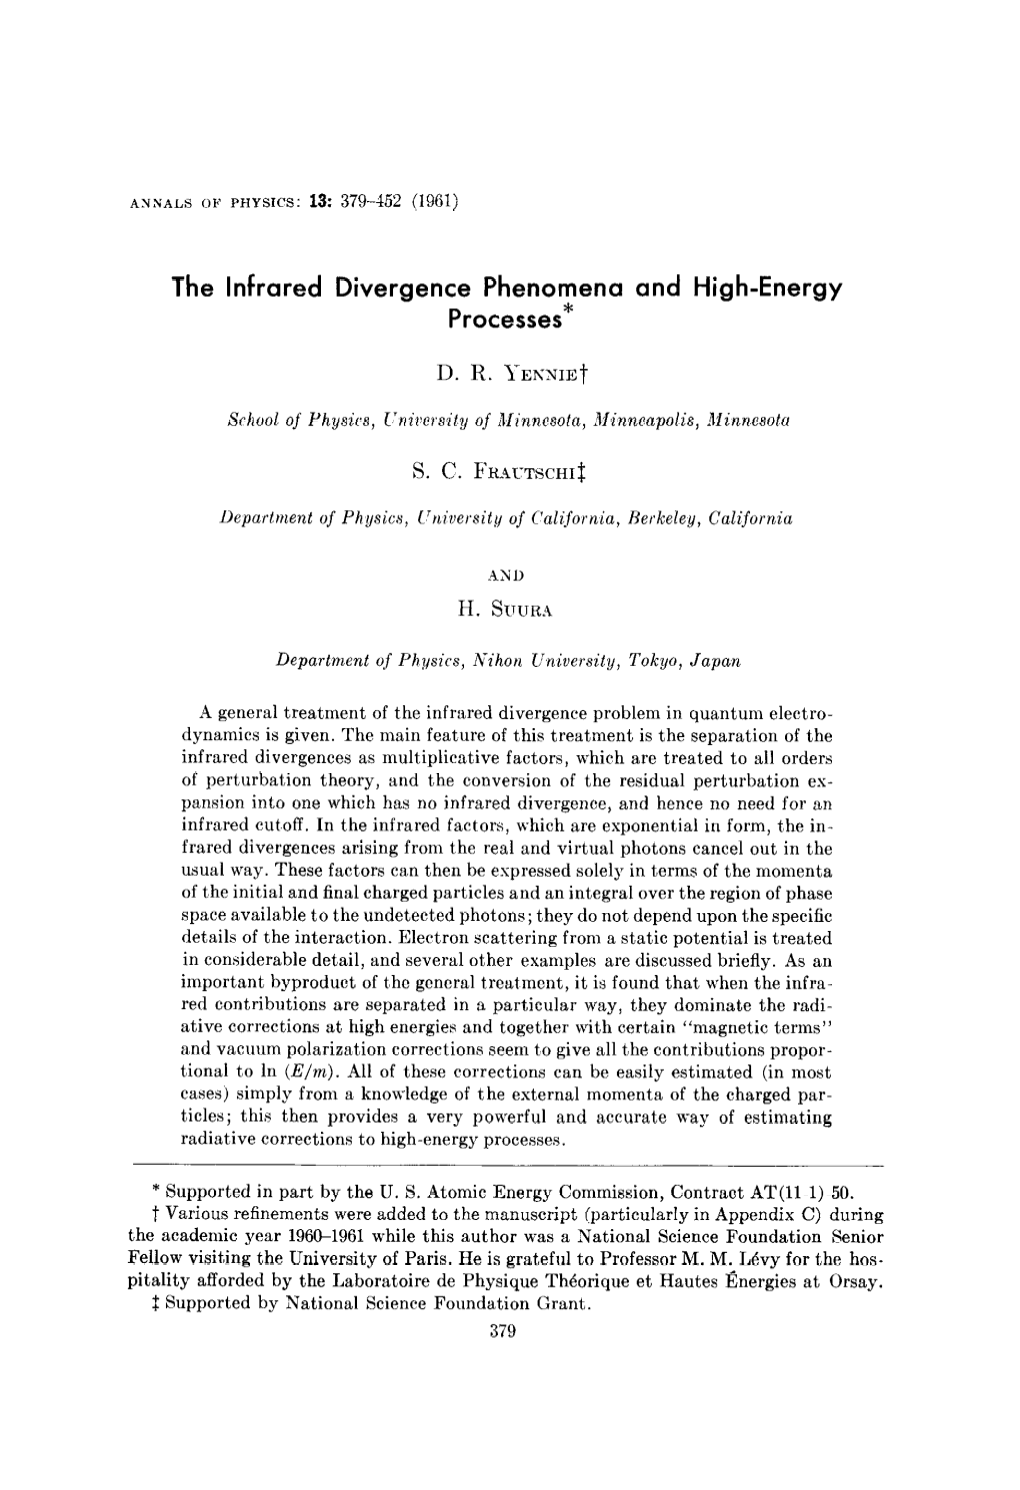 The Infrared Divergence Phenomena and High-Energy Processes*